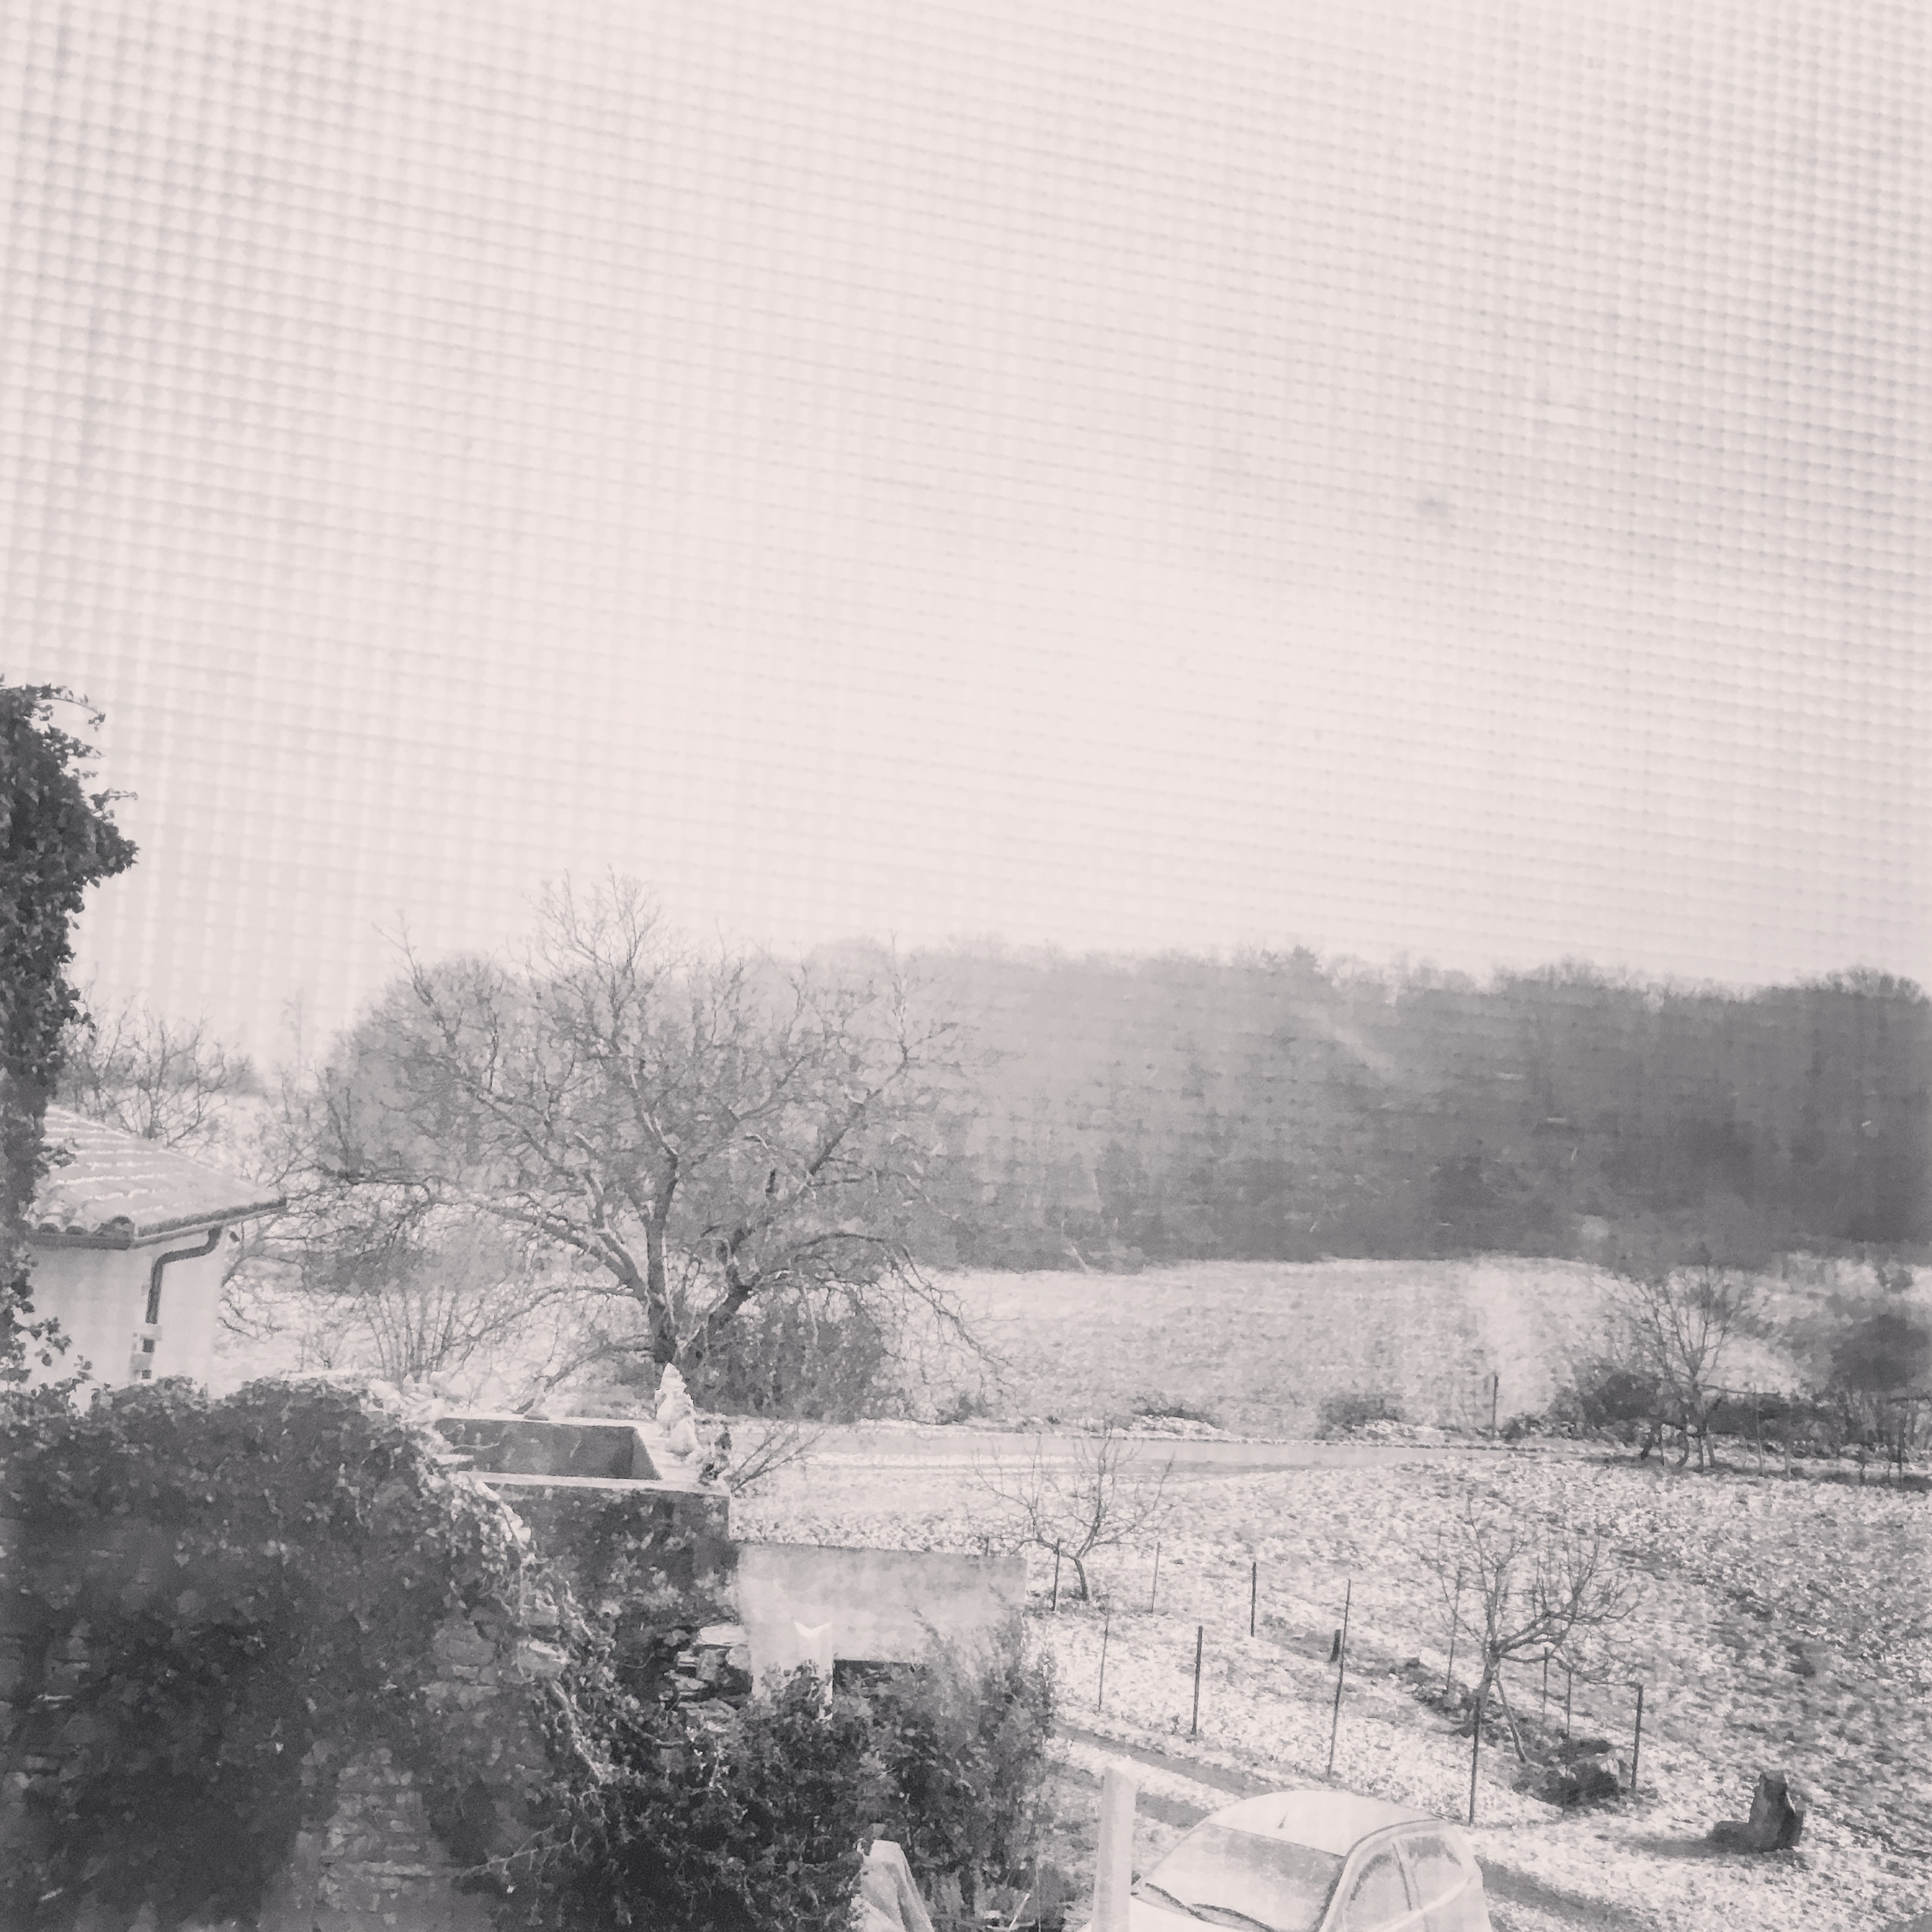 View from front bedroom window as the snow is starting to fall.